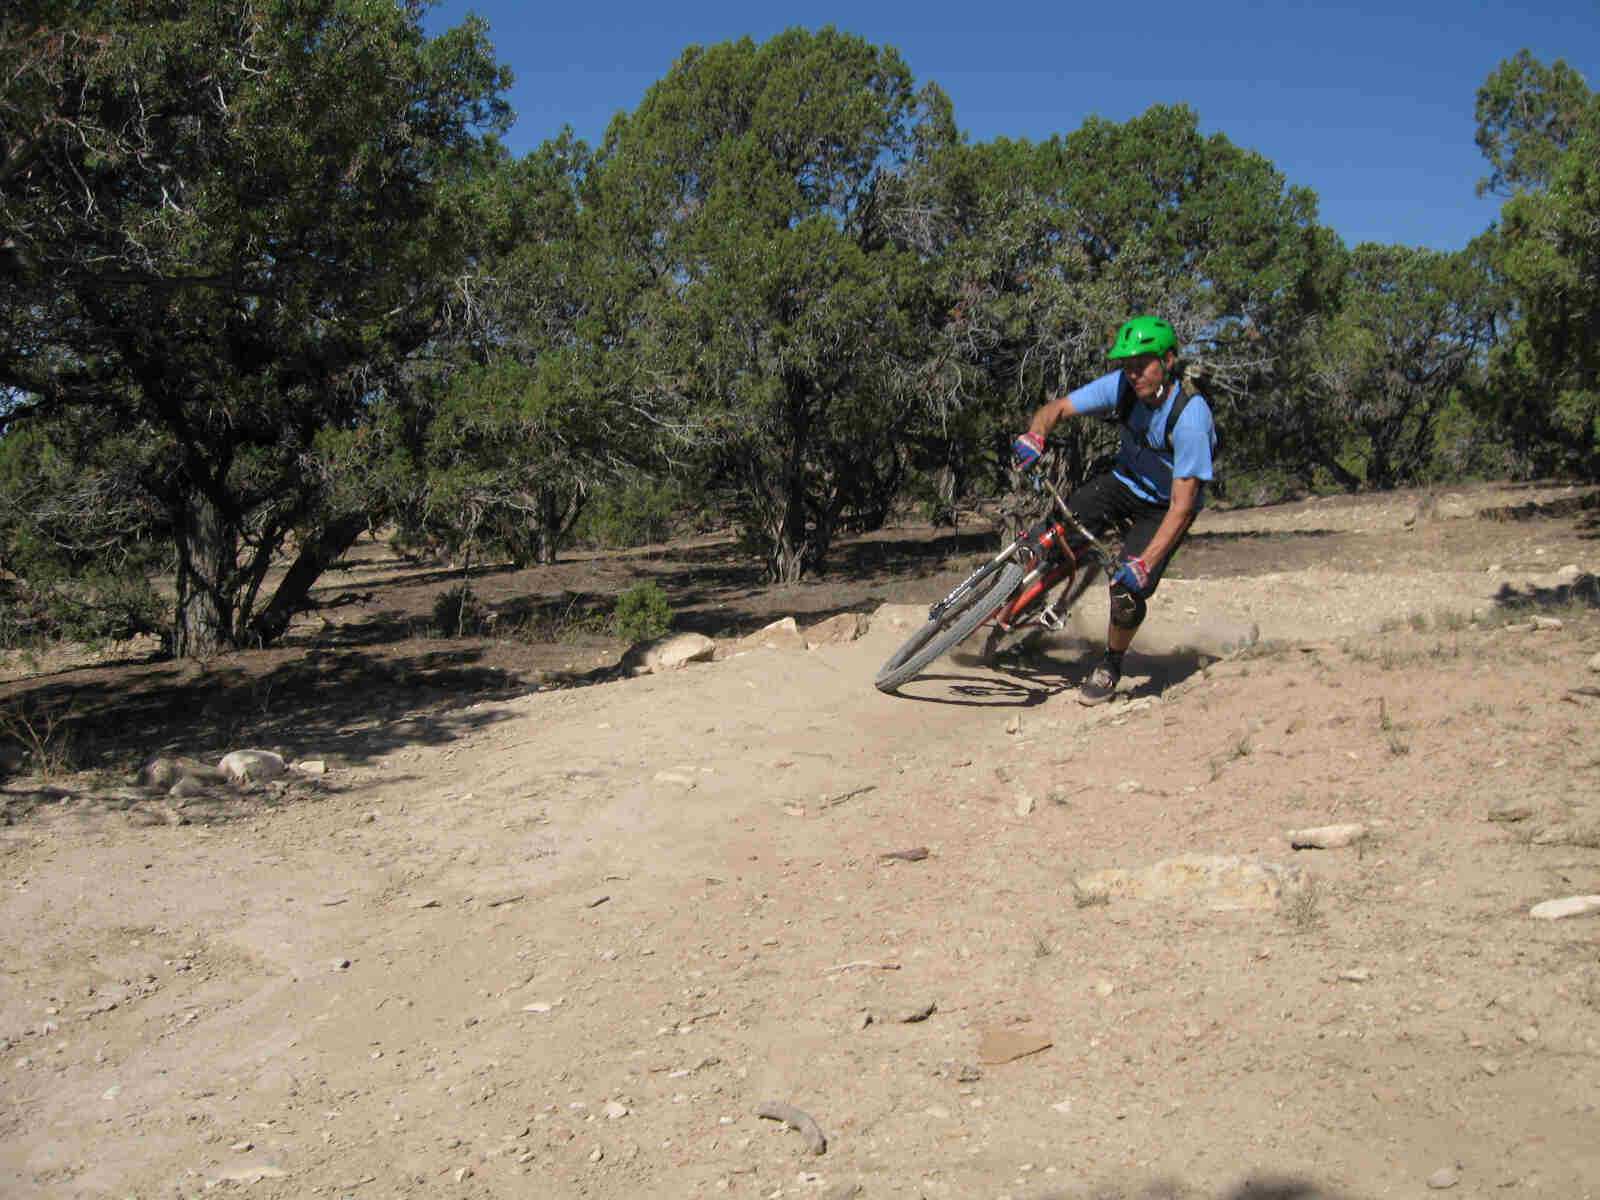 Front view of a cyclist riding a red Surly bike, rounding a turn on a rocky trail, with small trees behind them